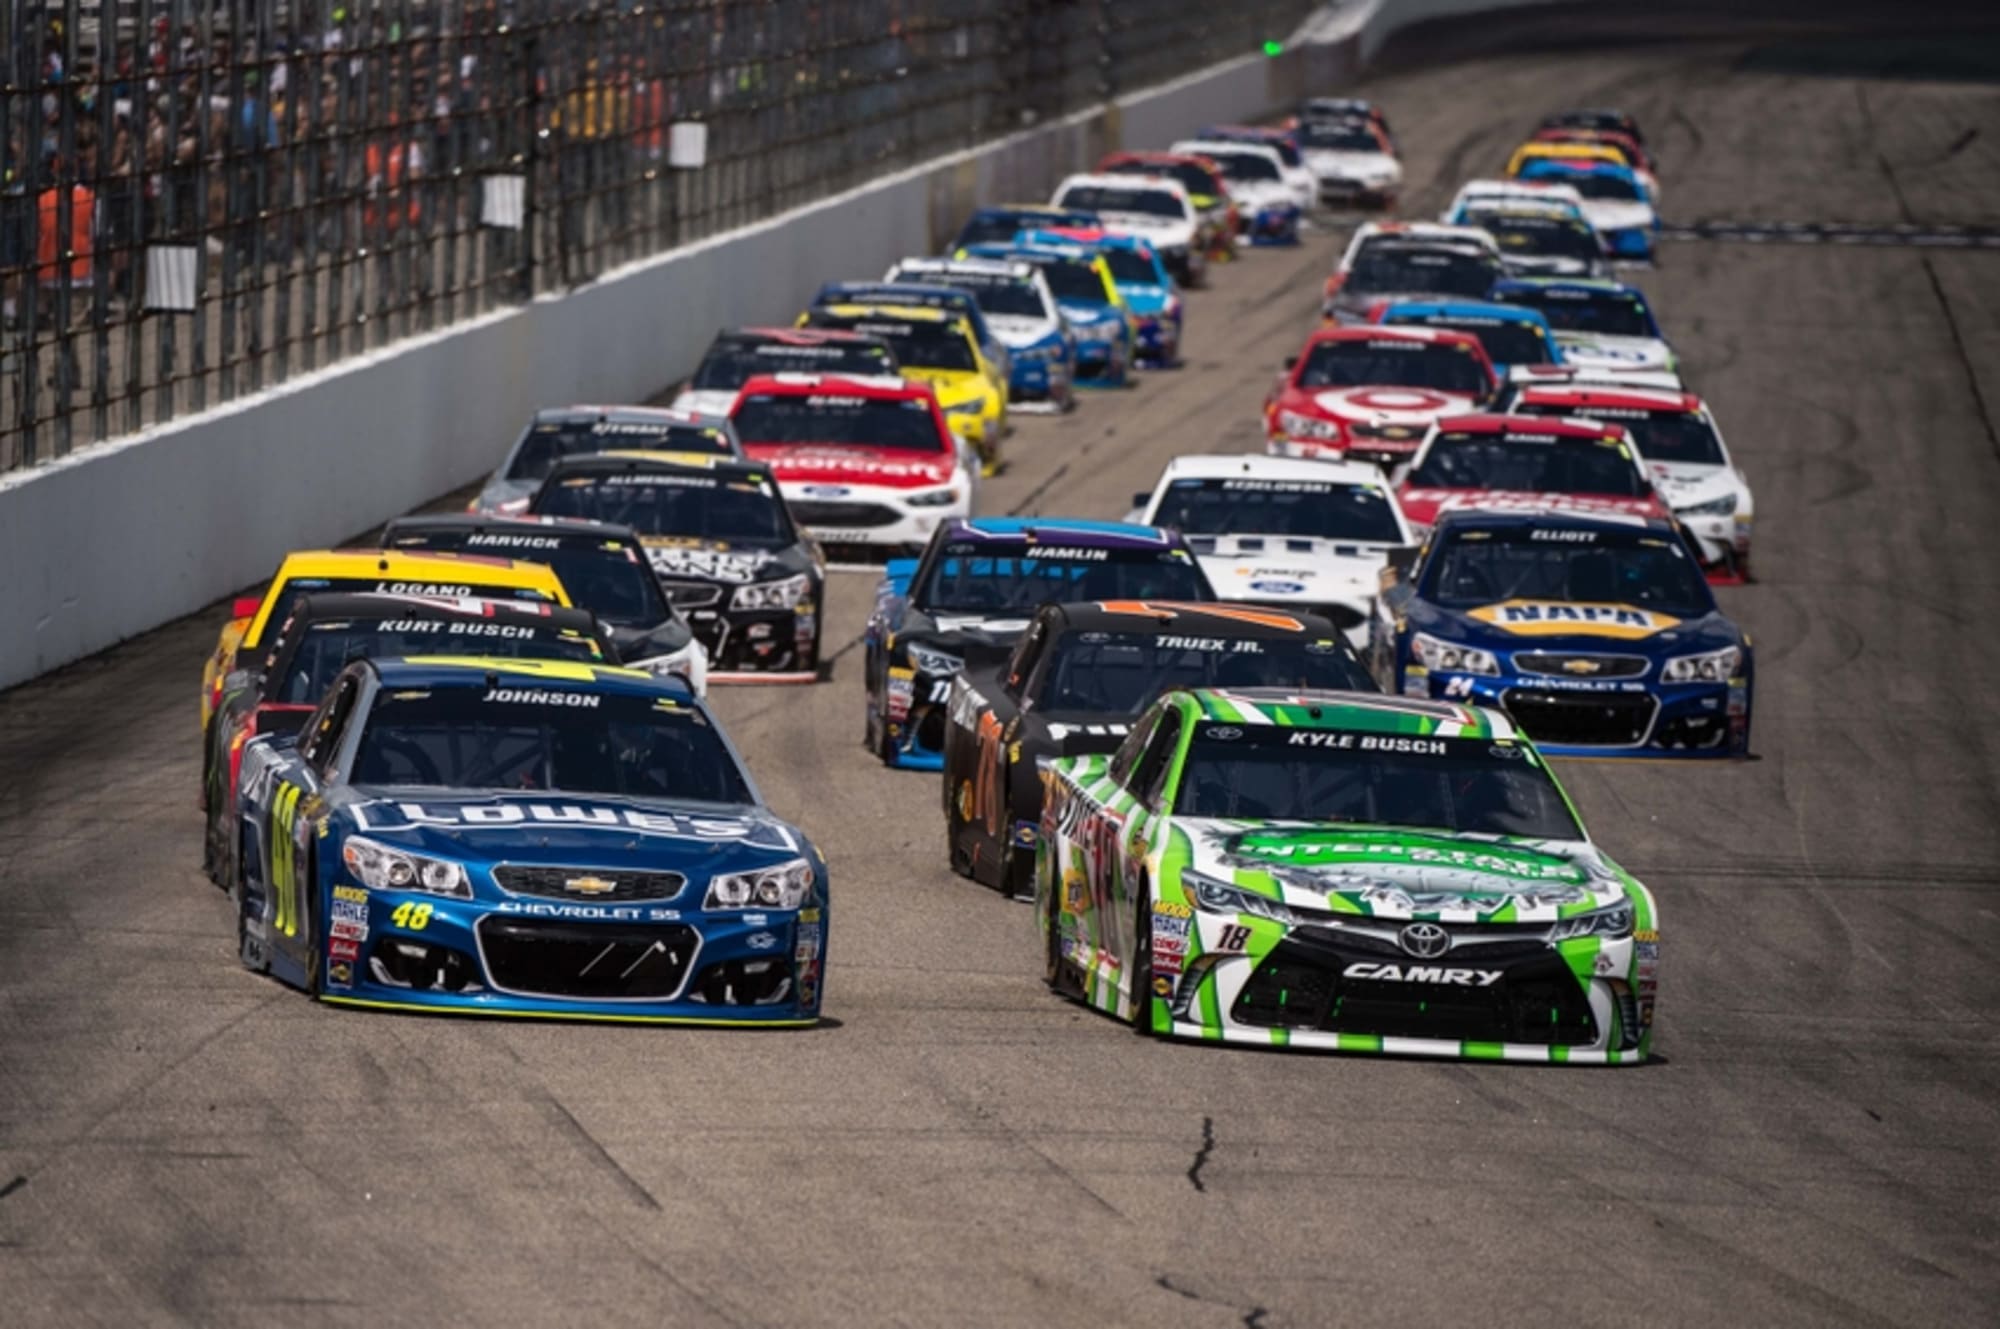 NASCAR 4 Predictions for the Bad Boy Off Road 300 at New Hampshire